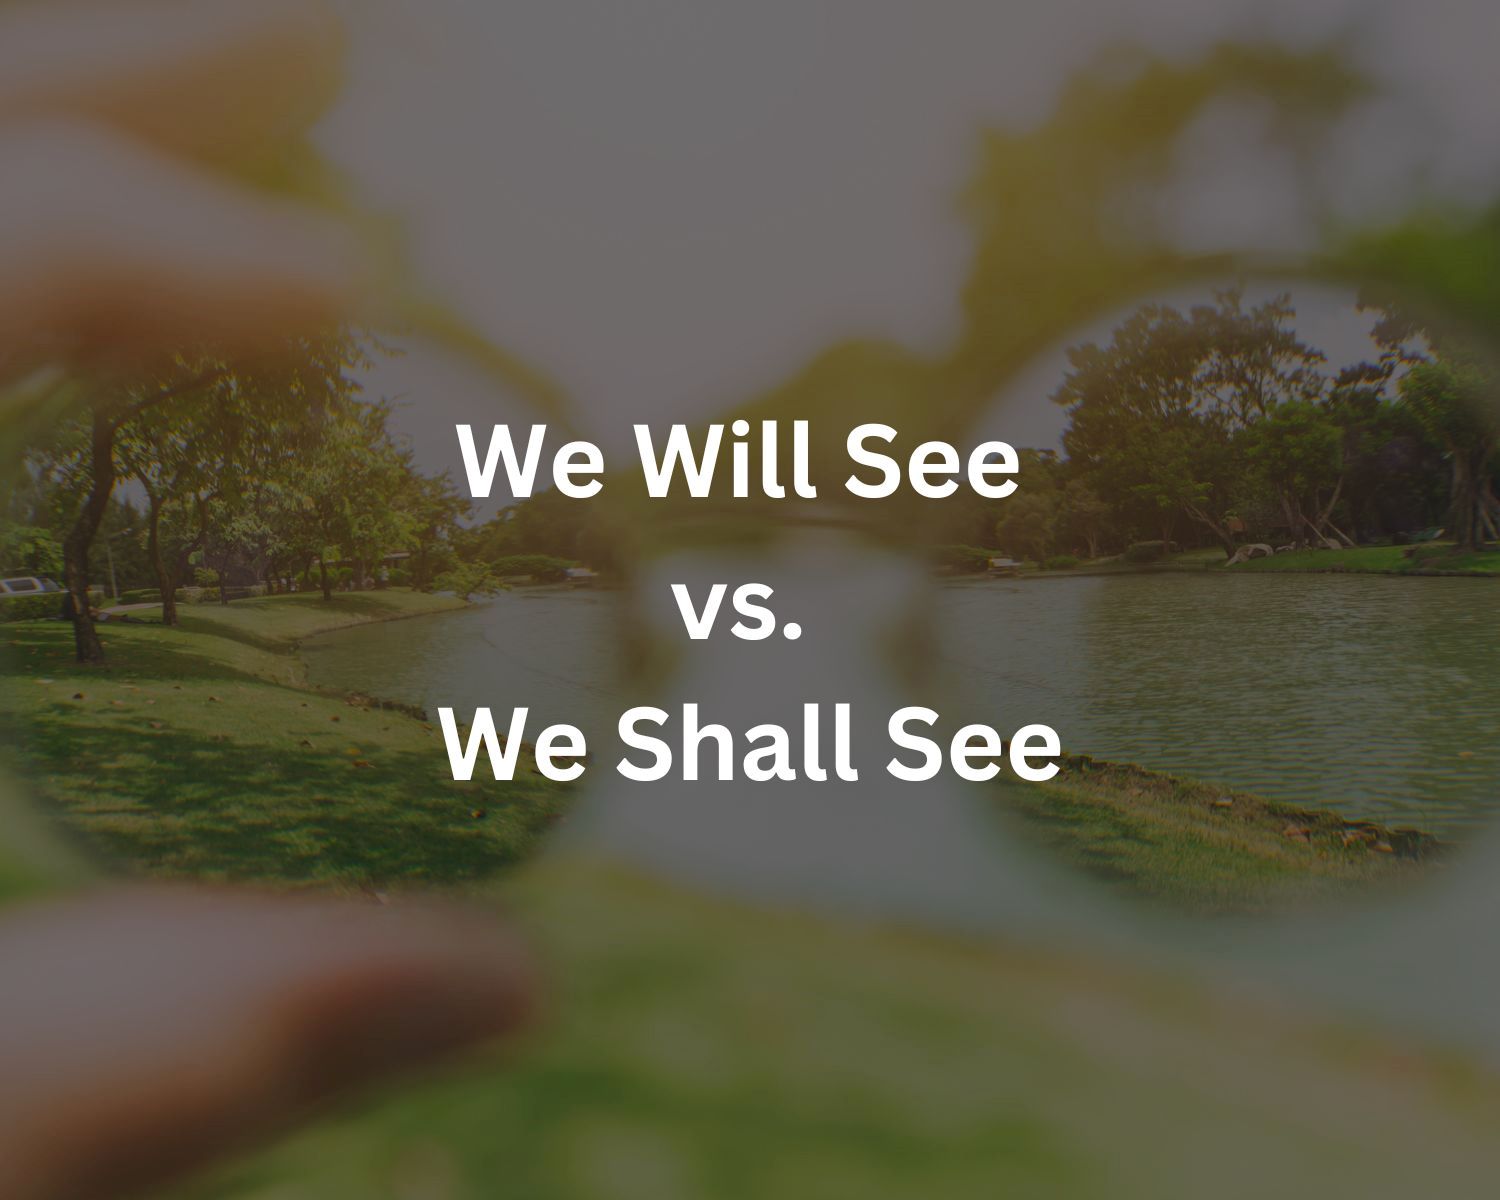 The Key Difference Between 'We Will See' And 'We Shall See'